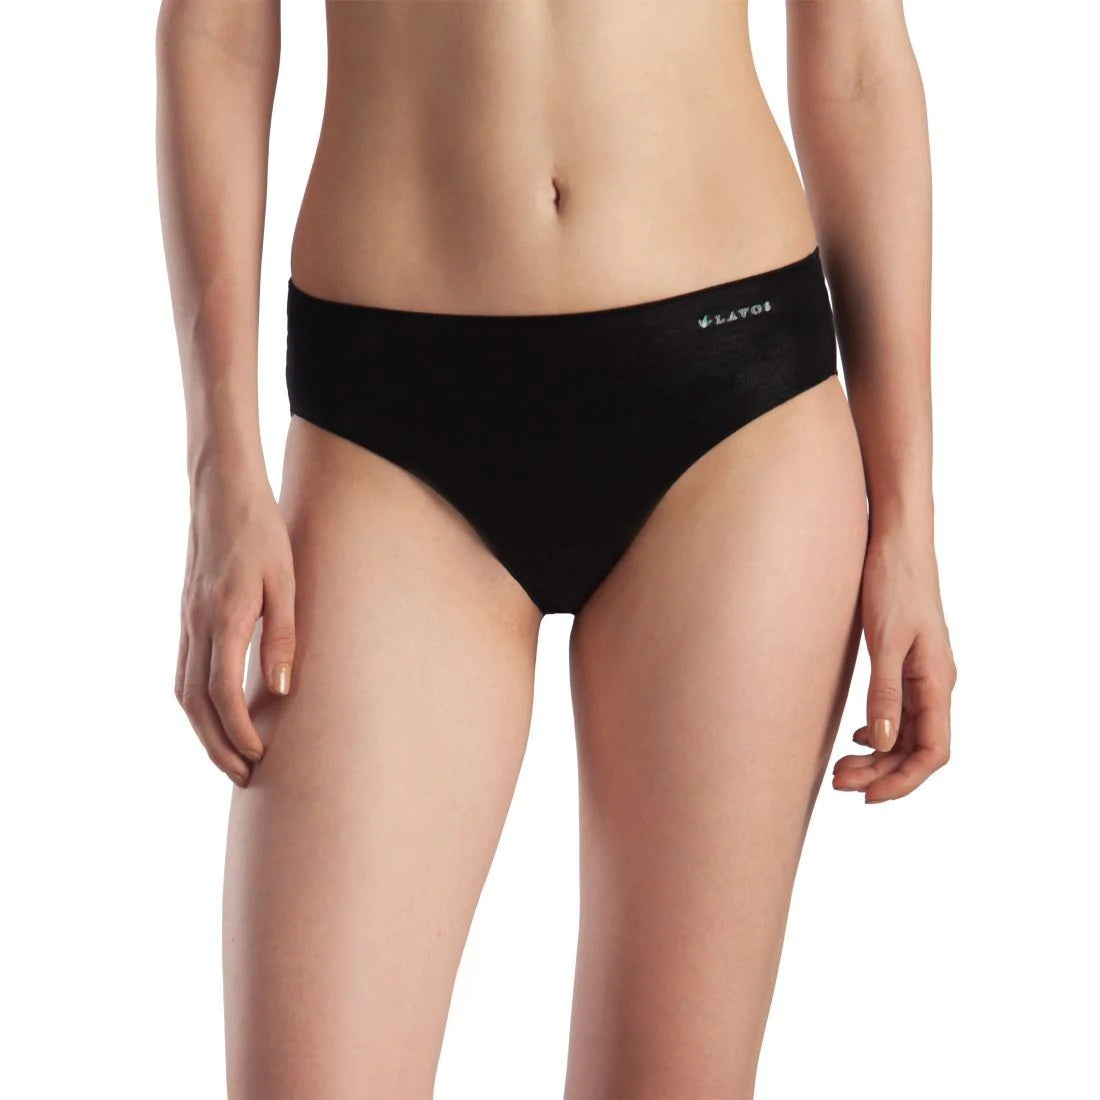 Lavos No Marks Panty No marks Panty, organic cotton, seamless - bare essentials